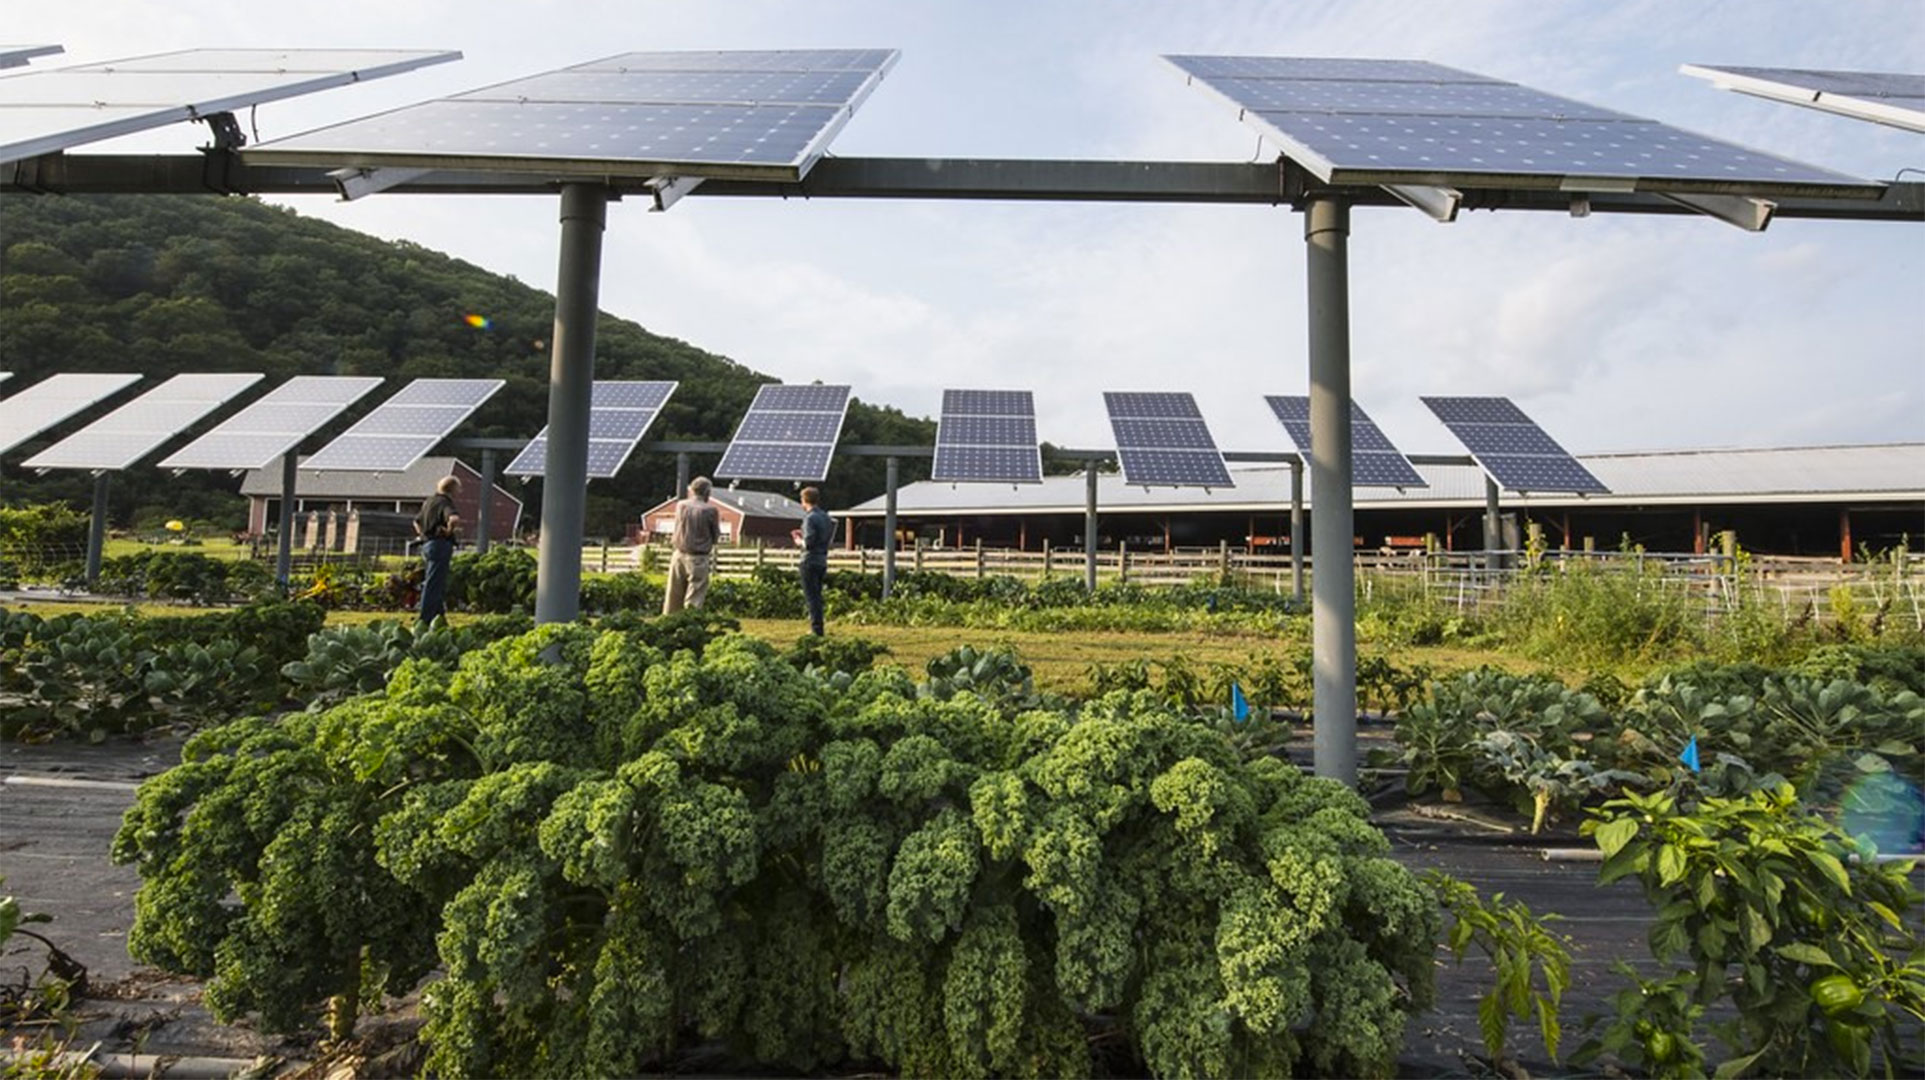 Plants growing beneath solar panels benefit from shade, irrigation.